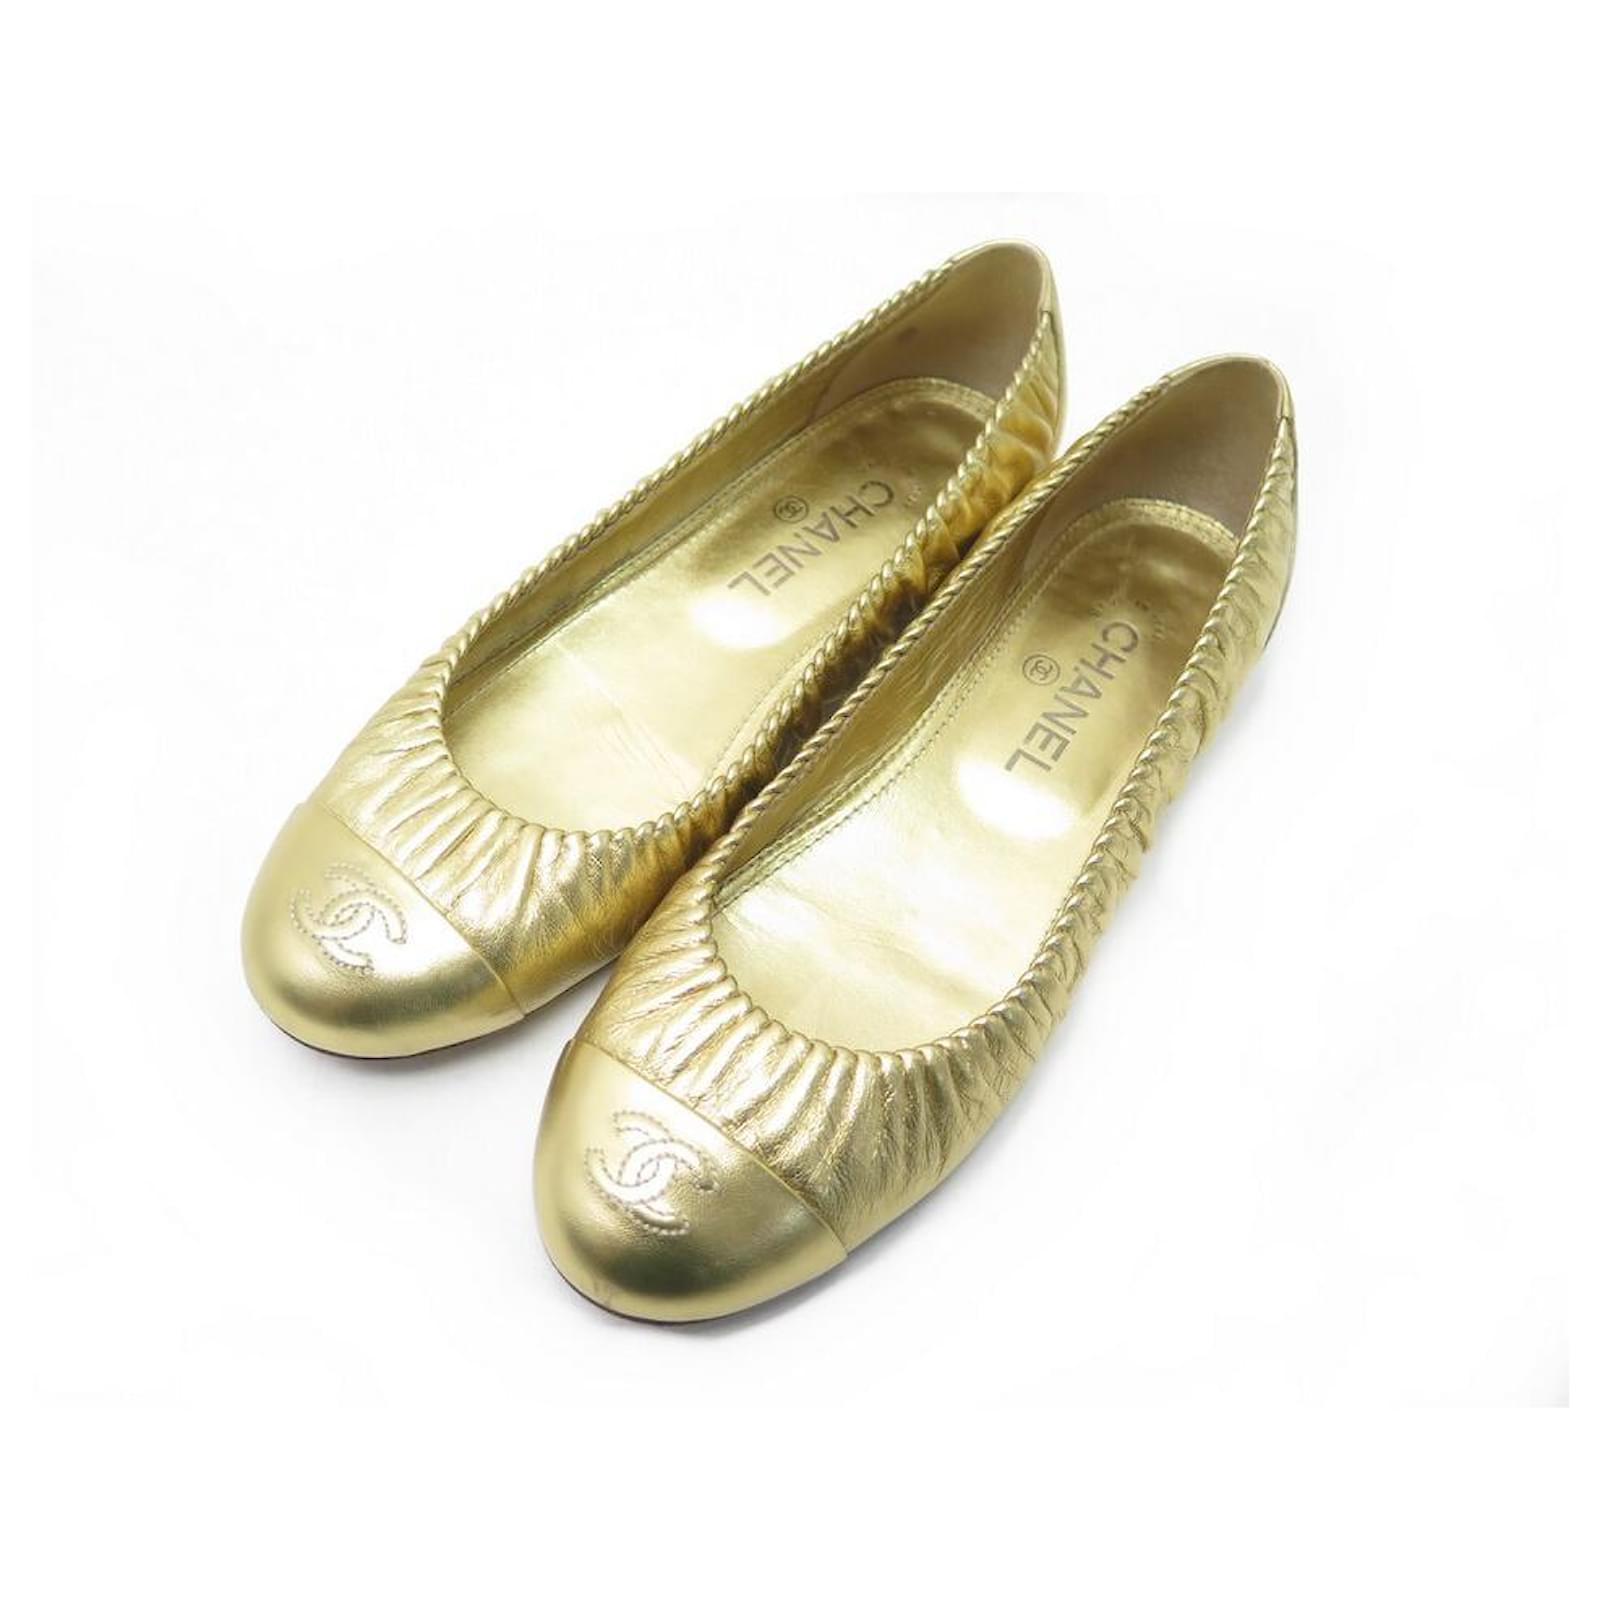 NEW CHANEL BALLERINA CC G LOGO SHOES31731 40 NEW SHOES GOLD LEATHER